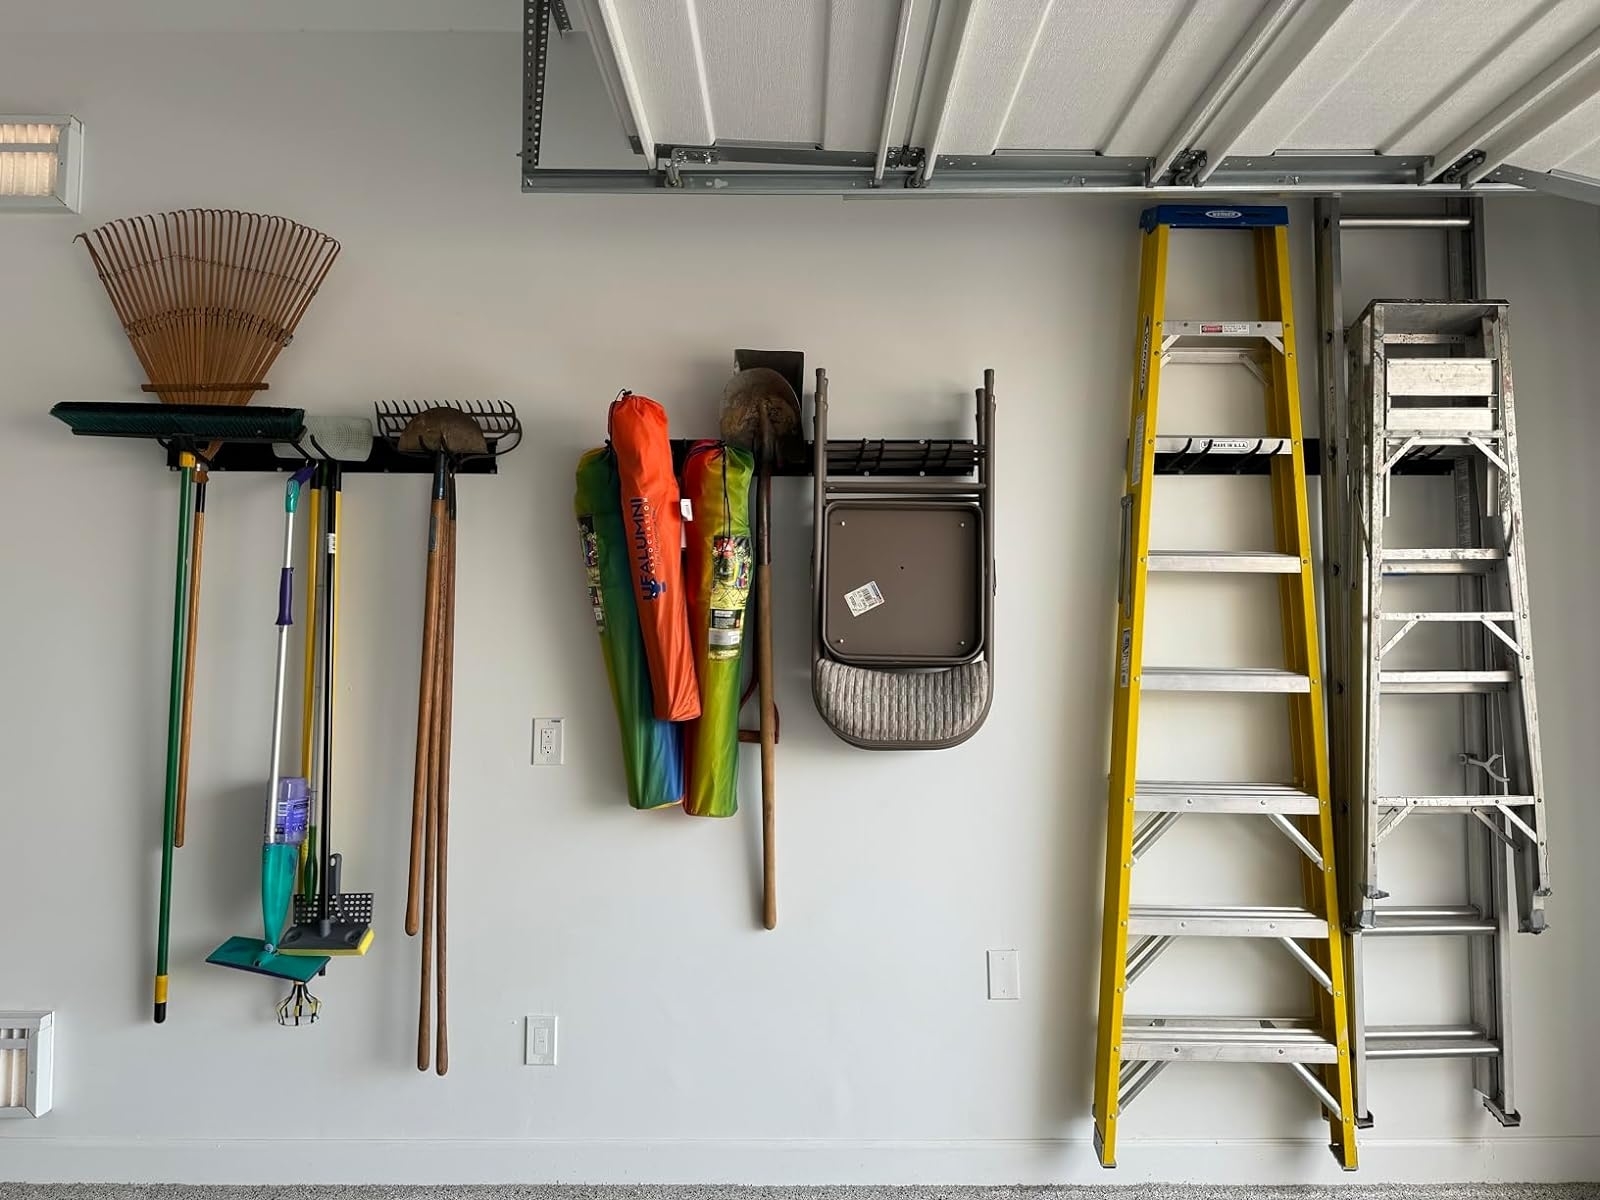 Organized garden tools and ladders hung neatly on a garage wall with the storage rack